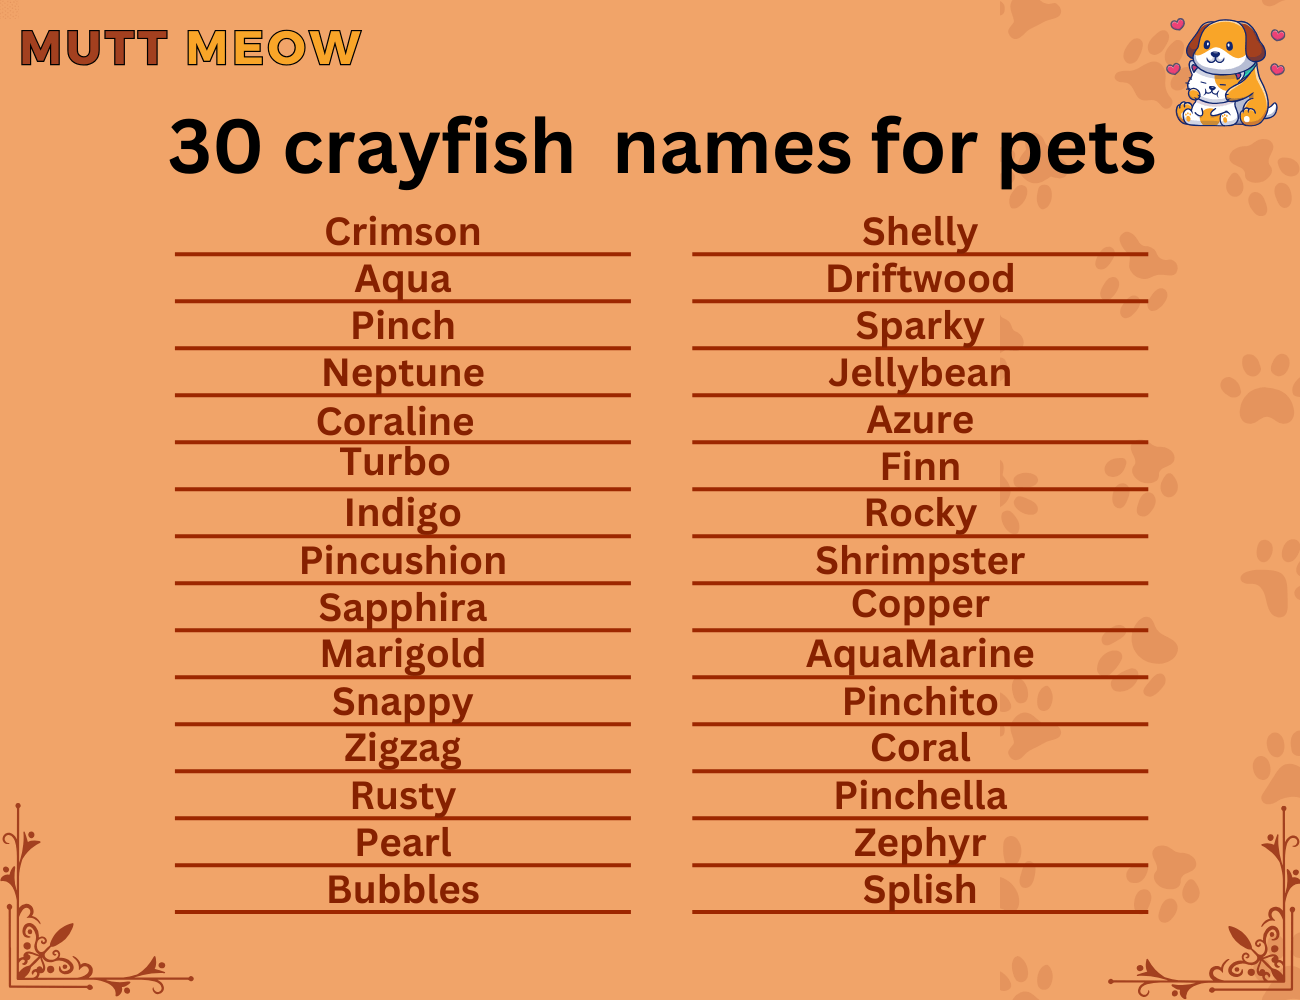 30 crayfish names for pets